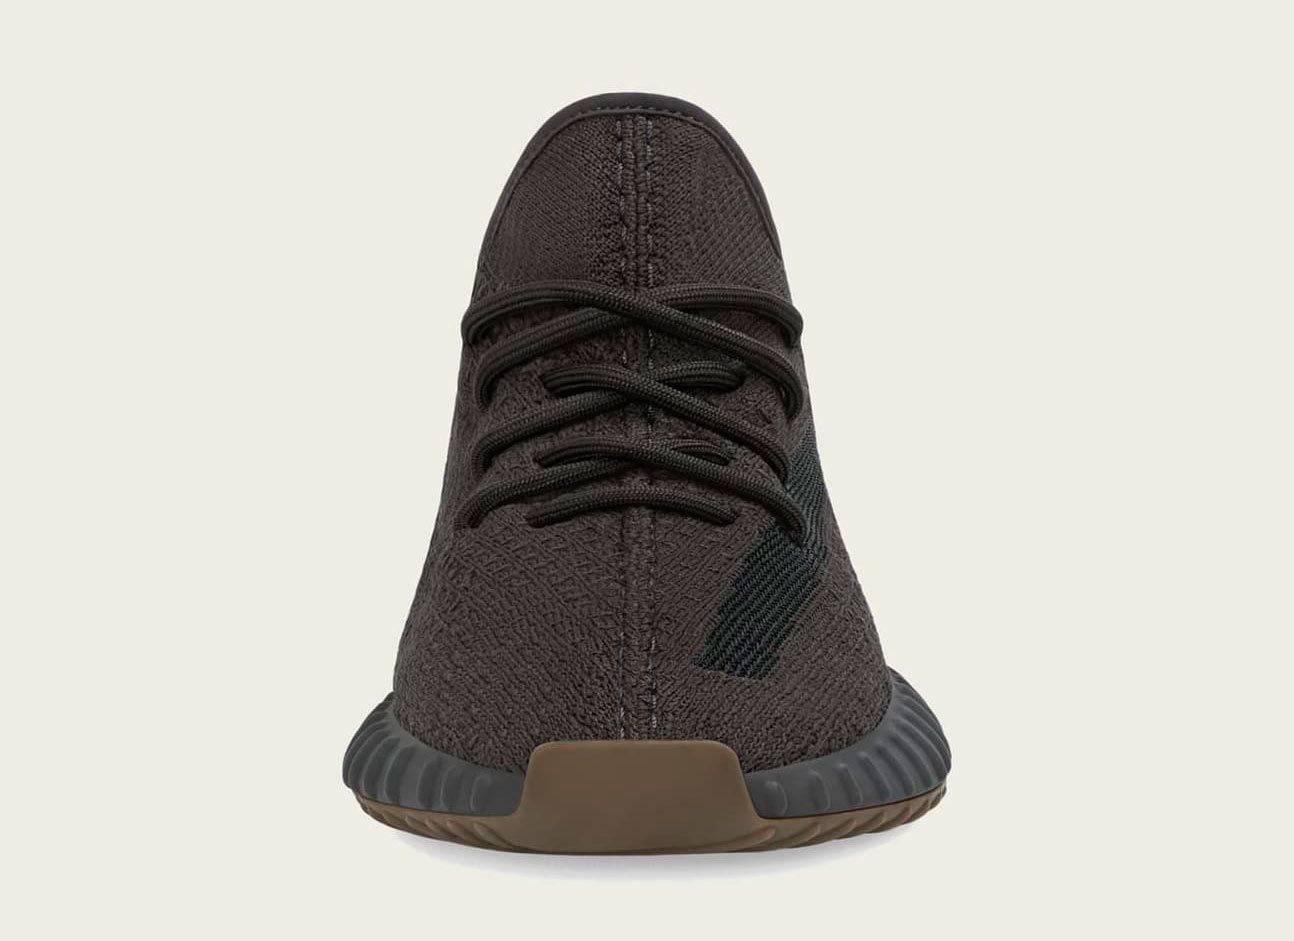 yeezy-boost-350-v2-cinder-release-date-price-2